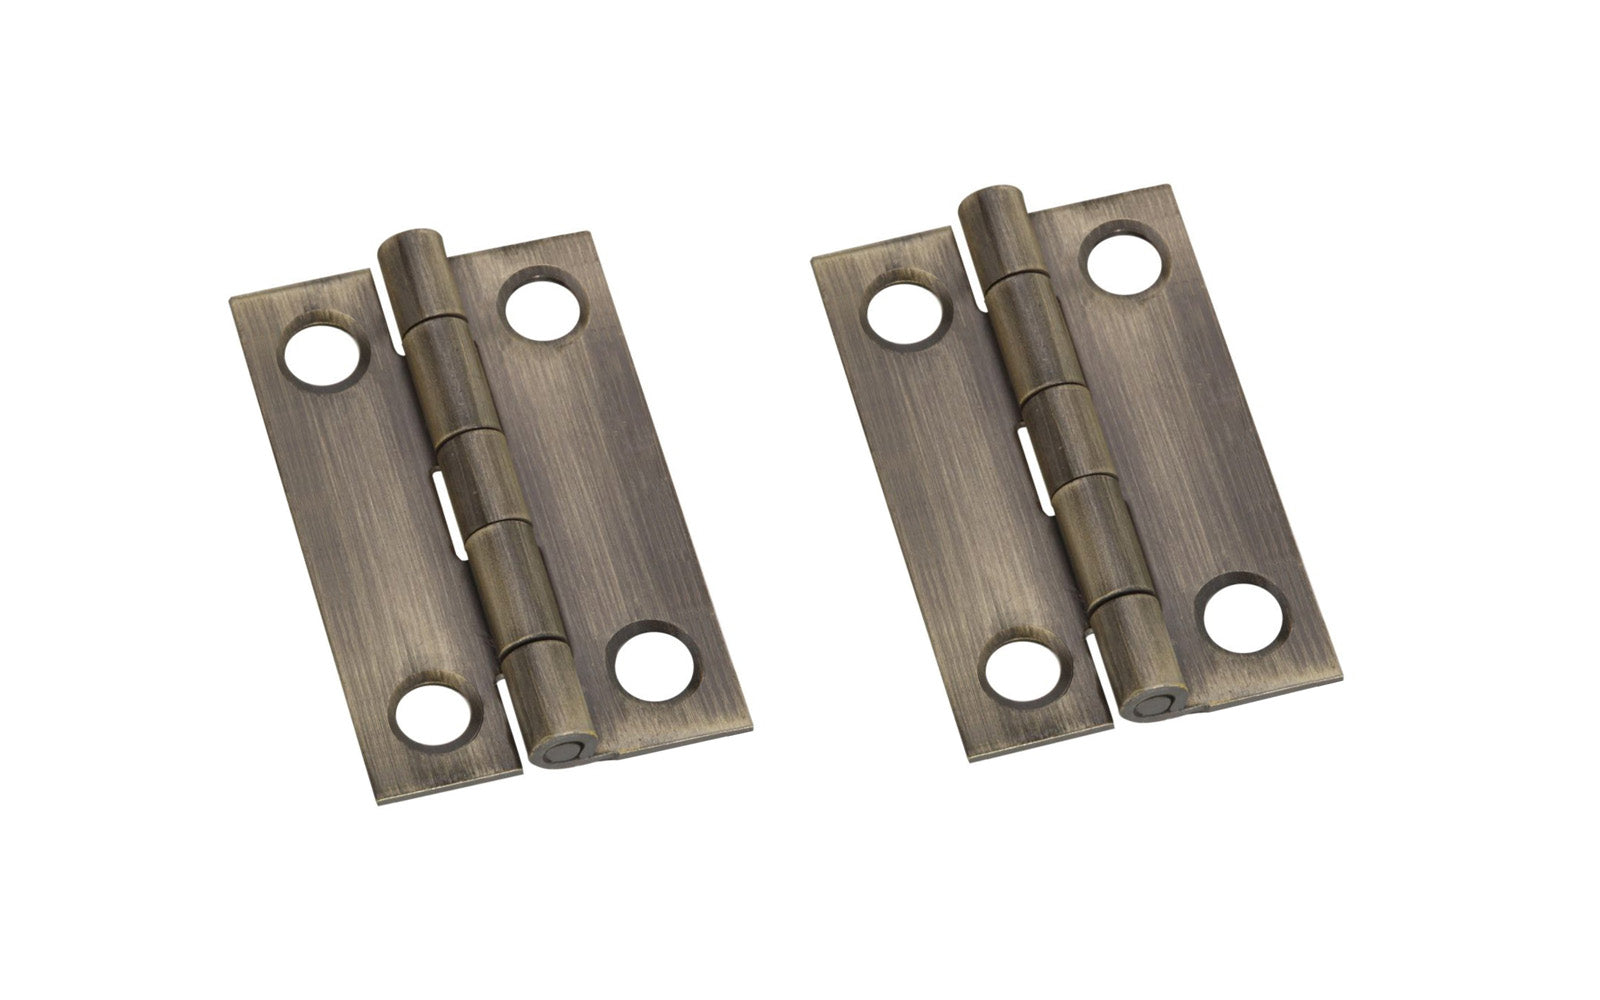 1" x 3/4" Antique Brass Hinges ~ 2 Pack ~ Antique brass hinges are designed to add a decorative appearance to small boxes, jewelry boxes, small lightweight cabinet doors, craft projects, etc. Made of solid brass material with an antique brass finish. 1" high x 3/4" wide. Surface mount. Non-removable pin. Pair of hinges. National Hardware Model No. N211-185. 